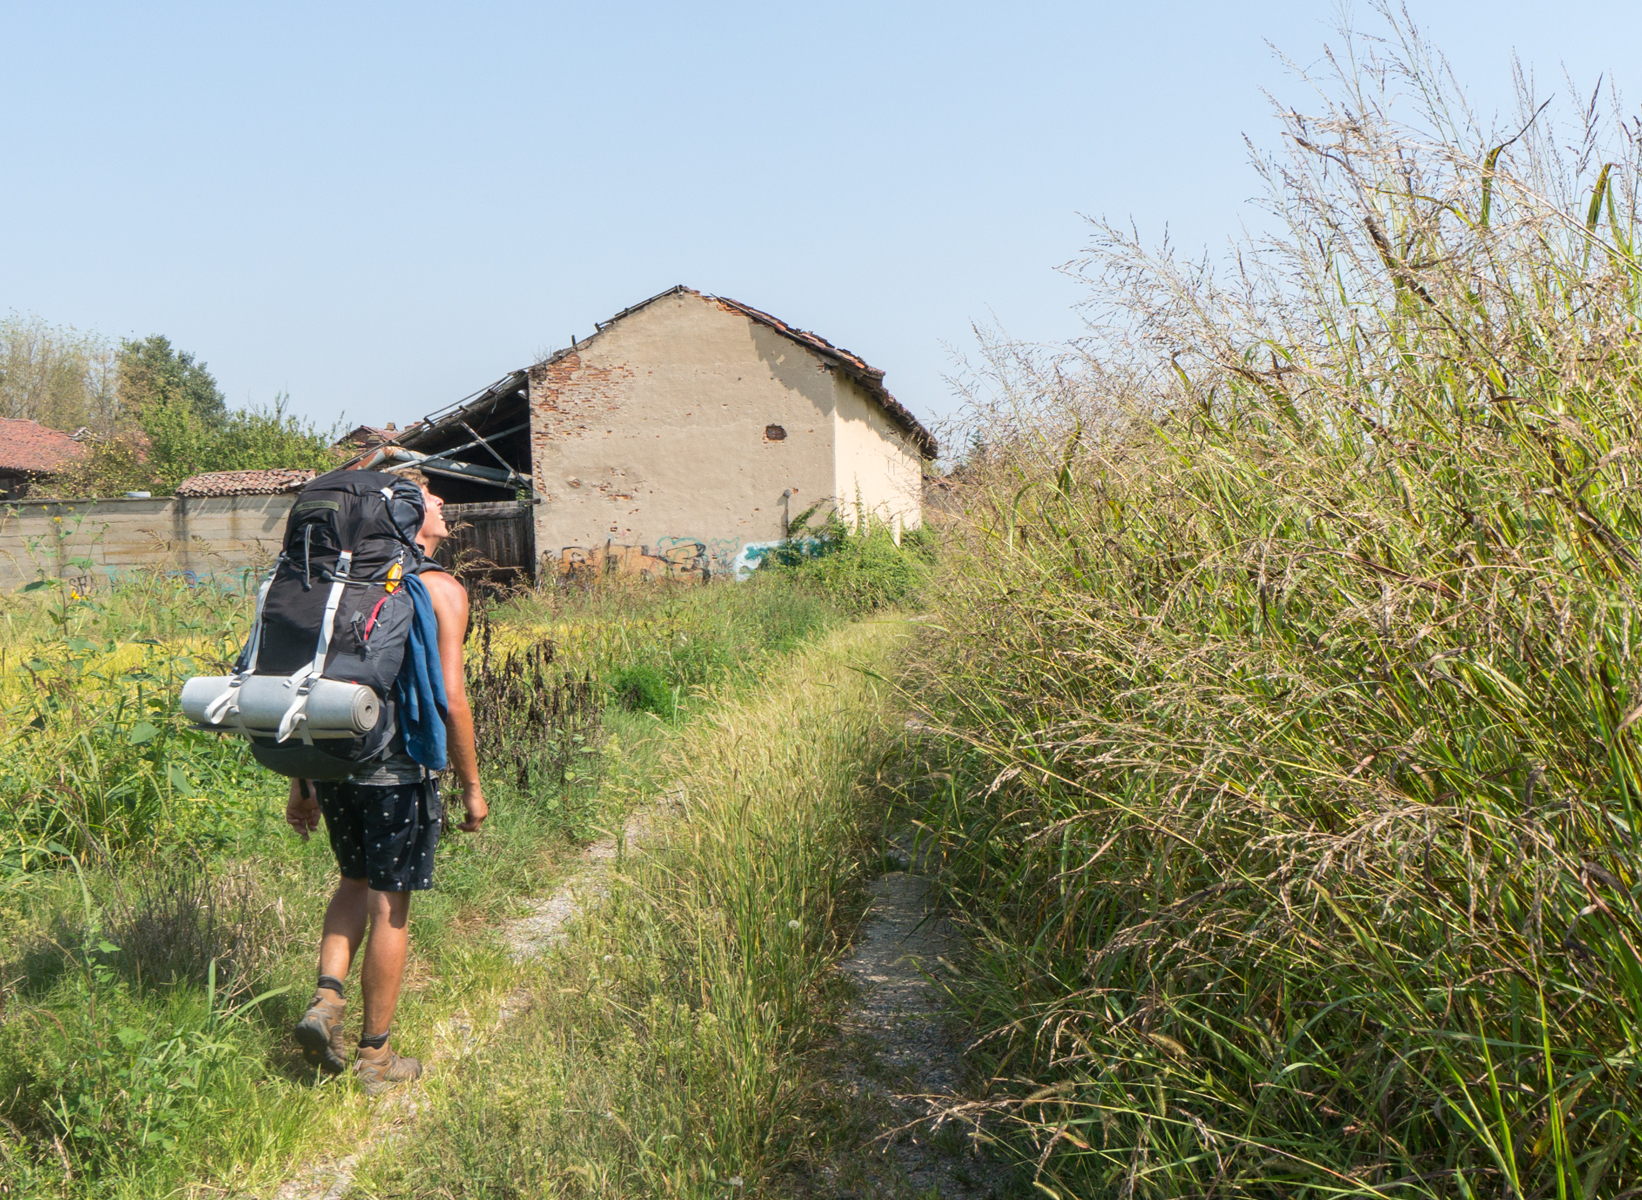 A pilgrim heads toward Vercelly, Italy, on Via Francigena as it passes through agricultural land | Photo by Mike Hudak